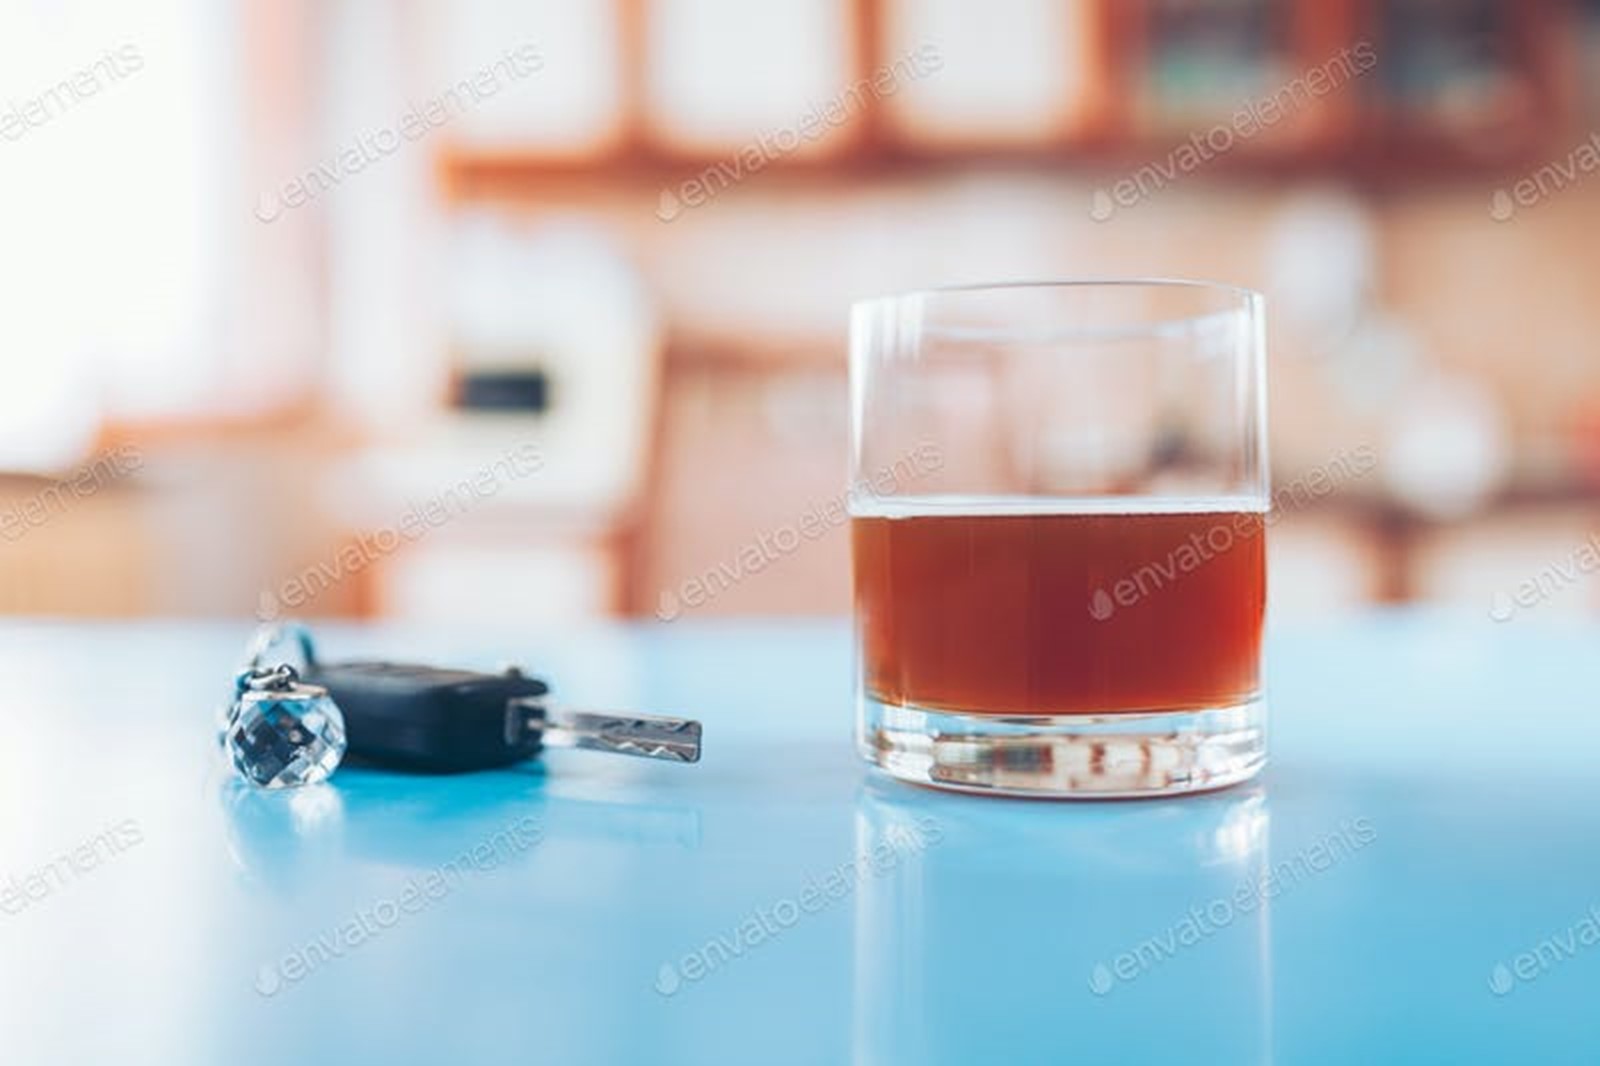 Drink driving. Car key and a glass of liquor